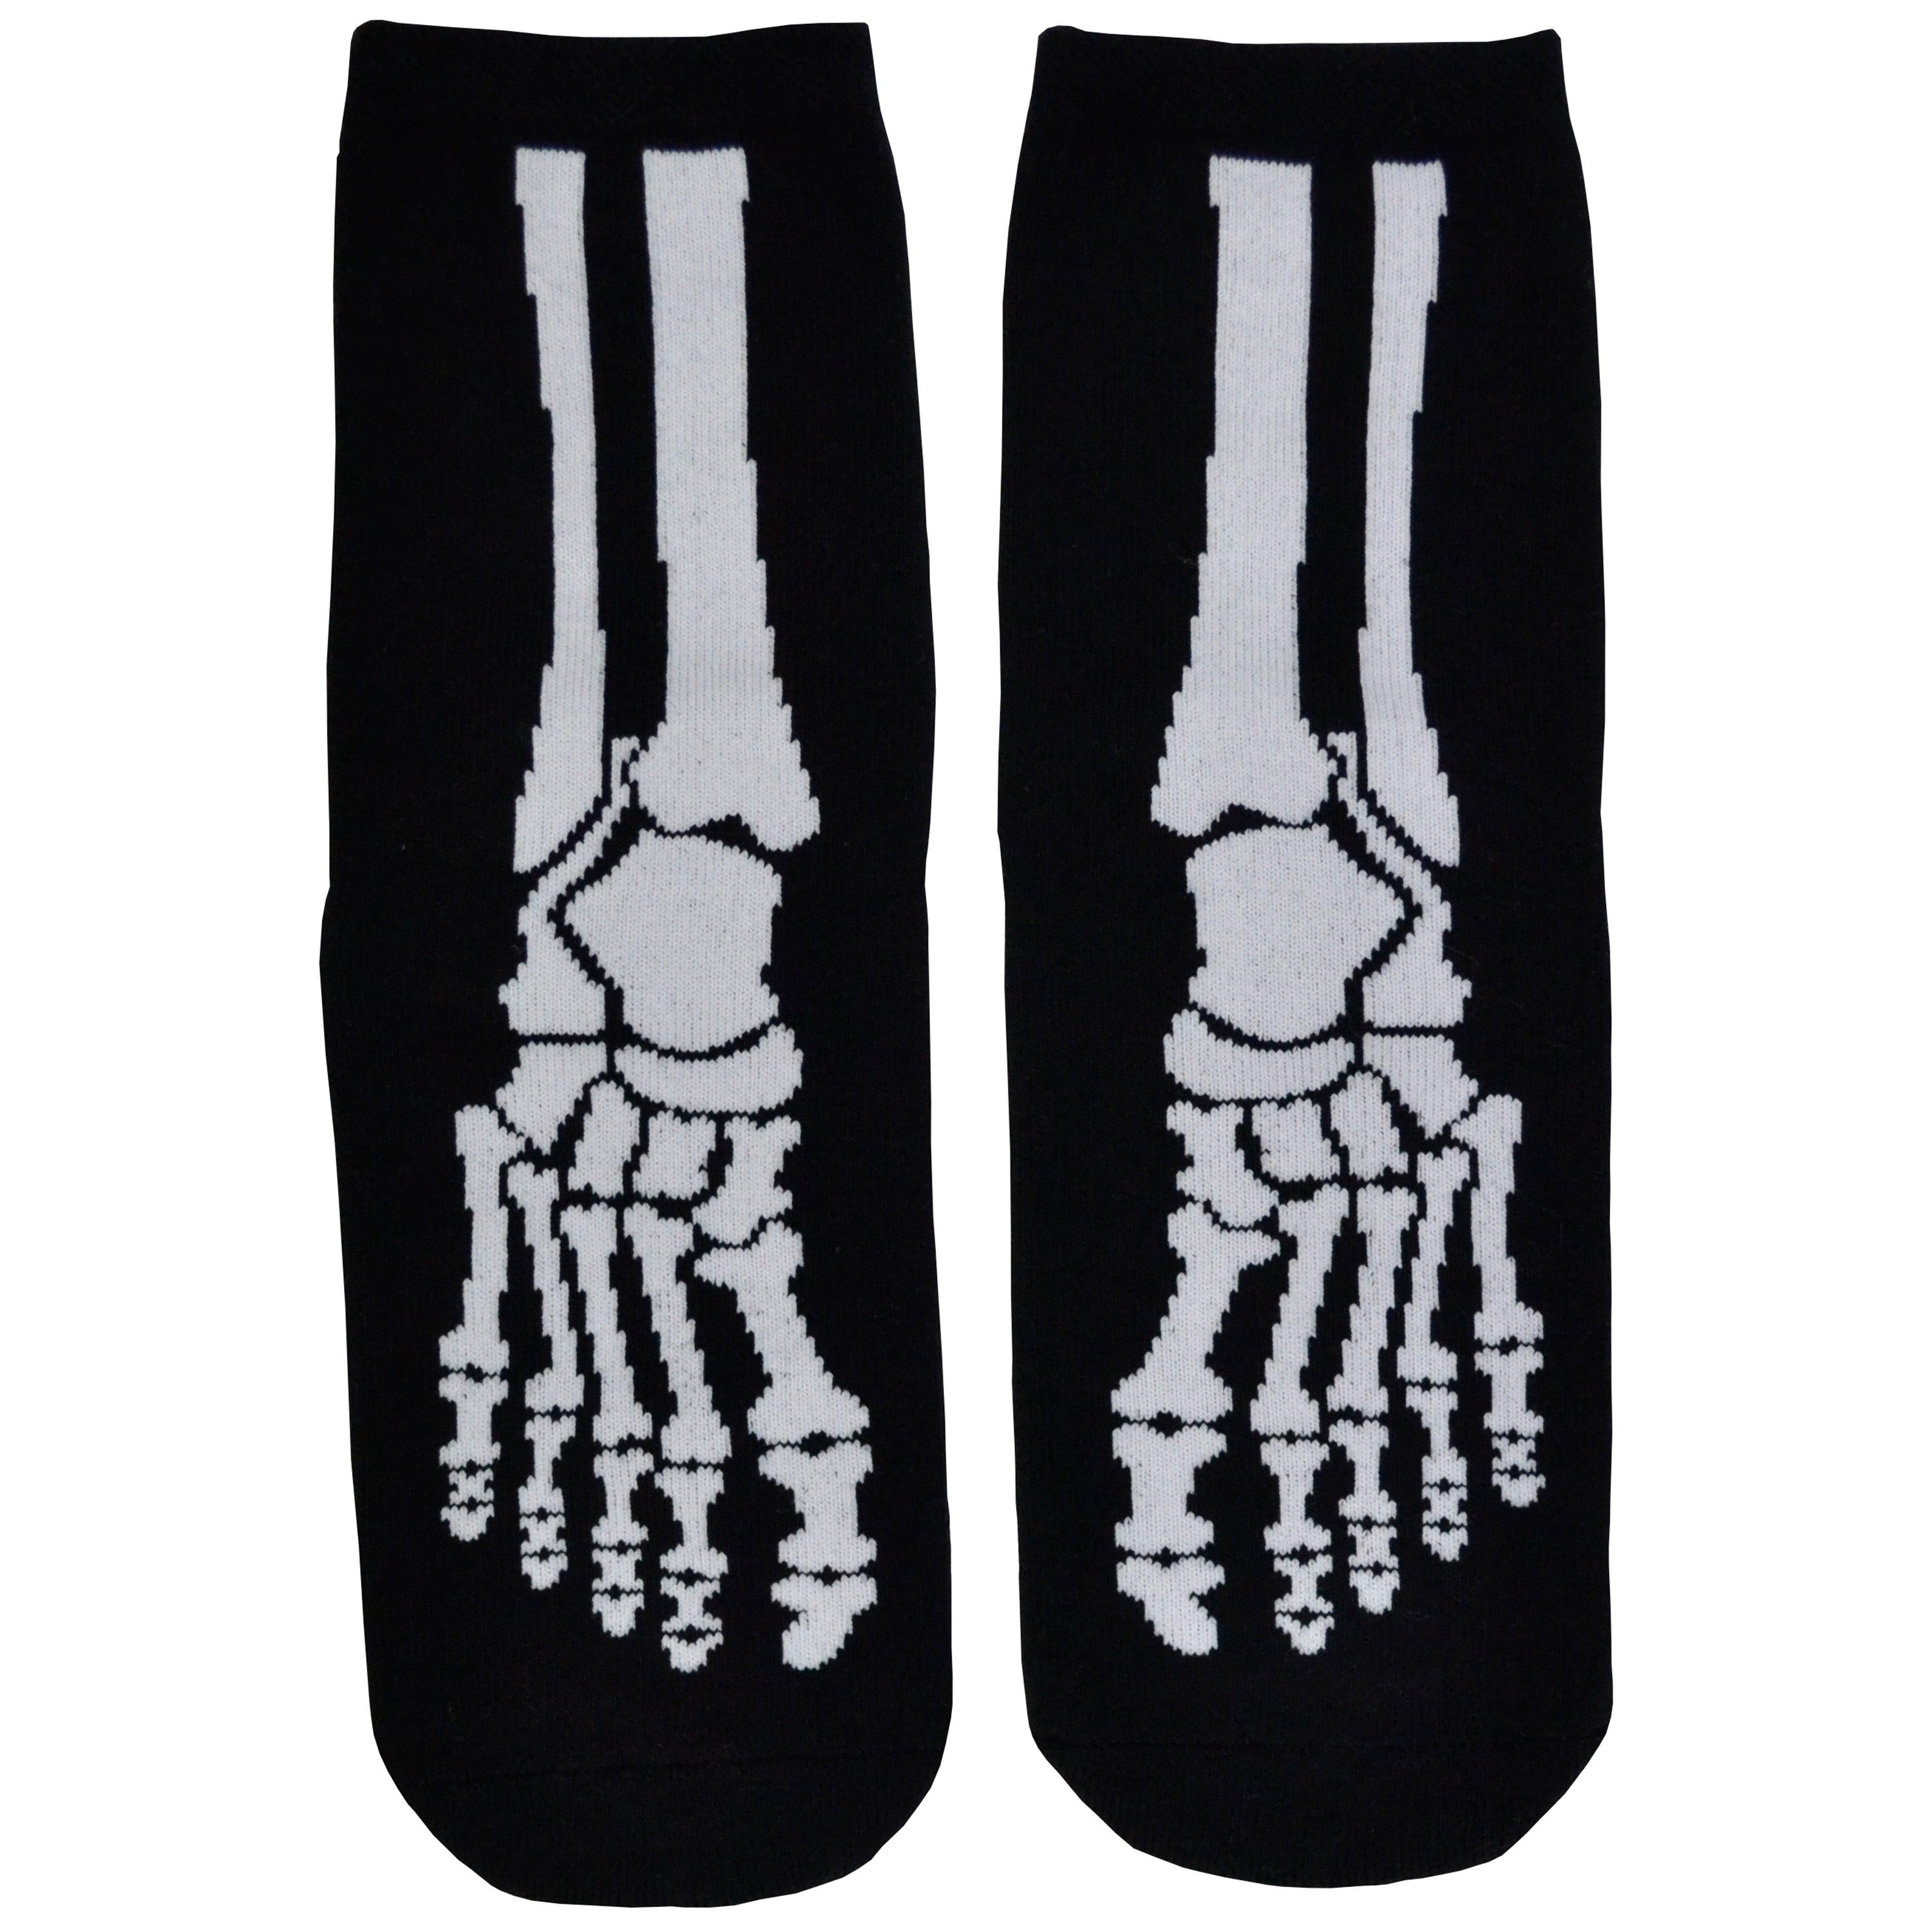 Shown in a flatlay, a pair of Foot Traffic brand, women's cotton crew socks in black. These socks feature a skeletal foot design on the front and little rubber grips on the foot of the sock.